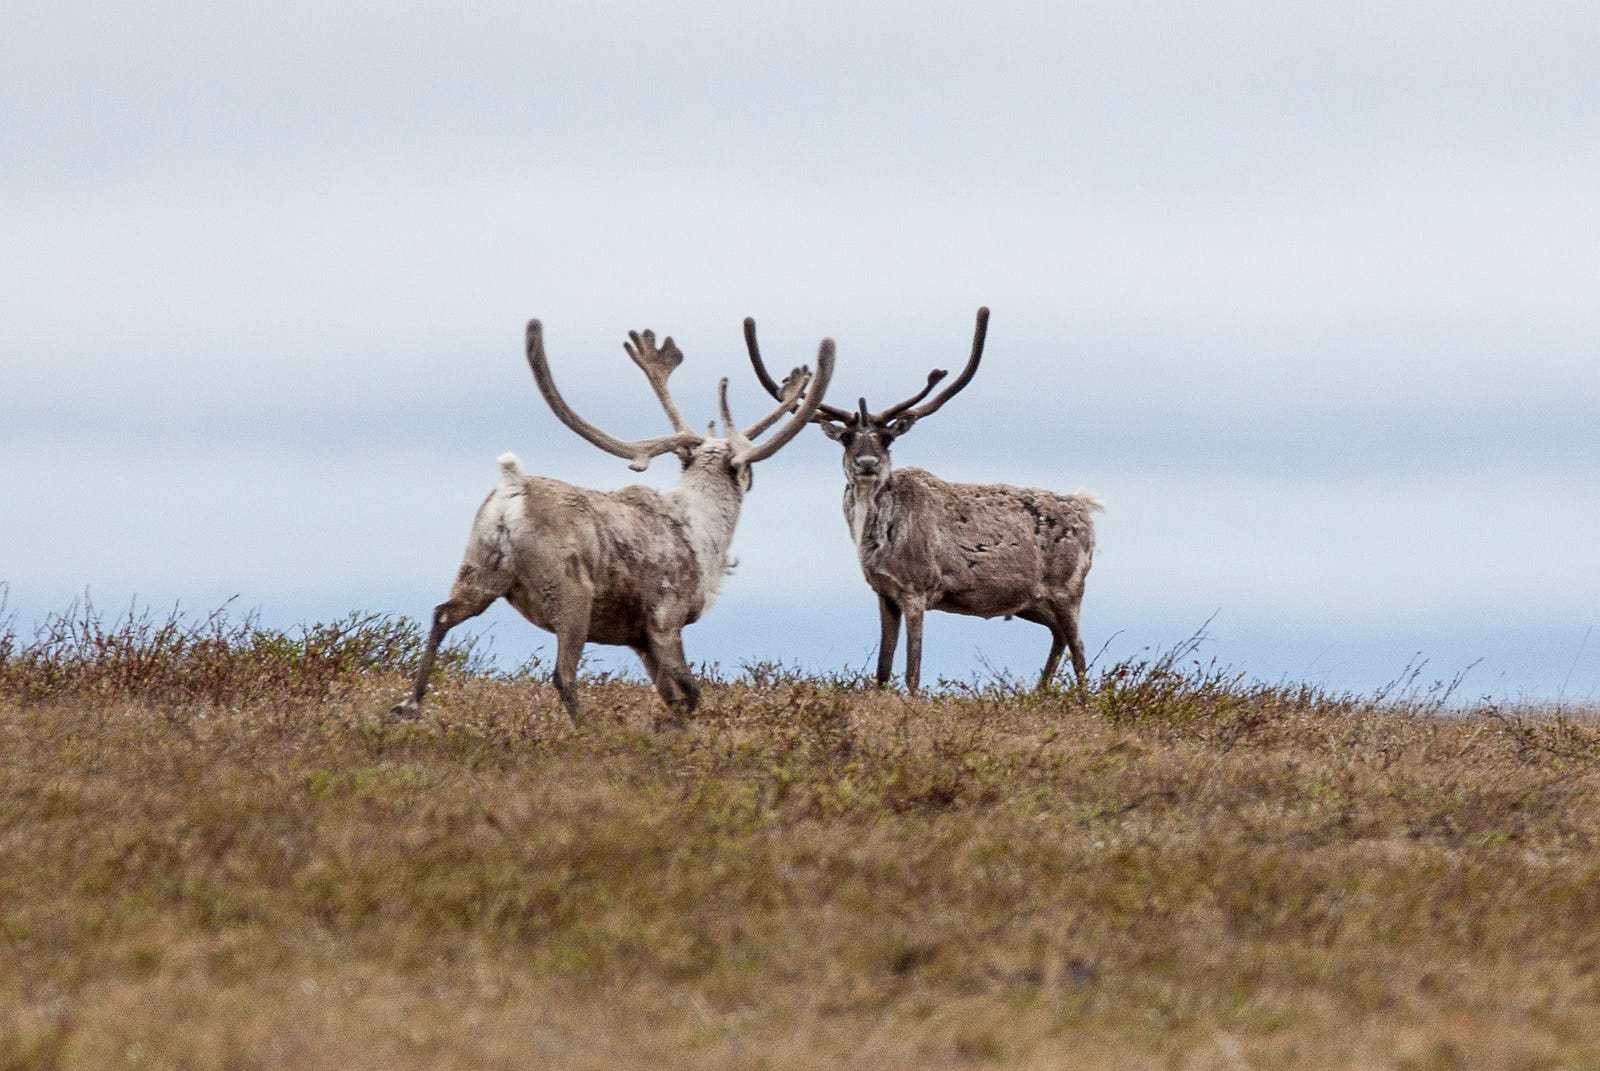 Two caribou on a hill. They have very large antlers, and one of them is looking right at the camera.